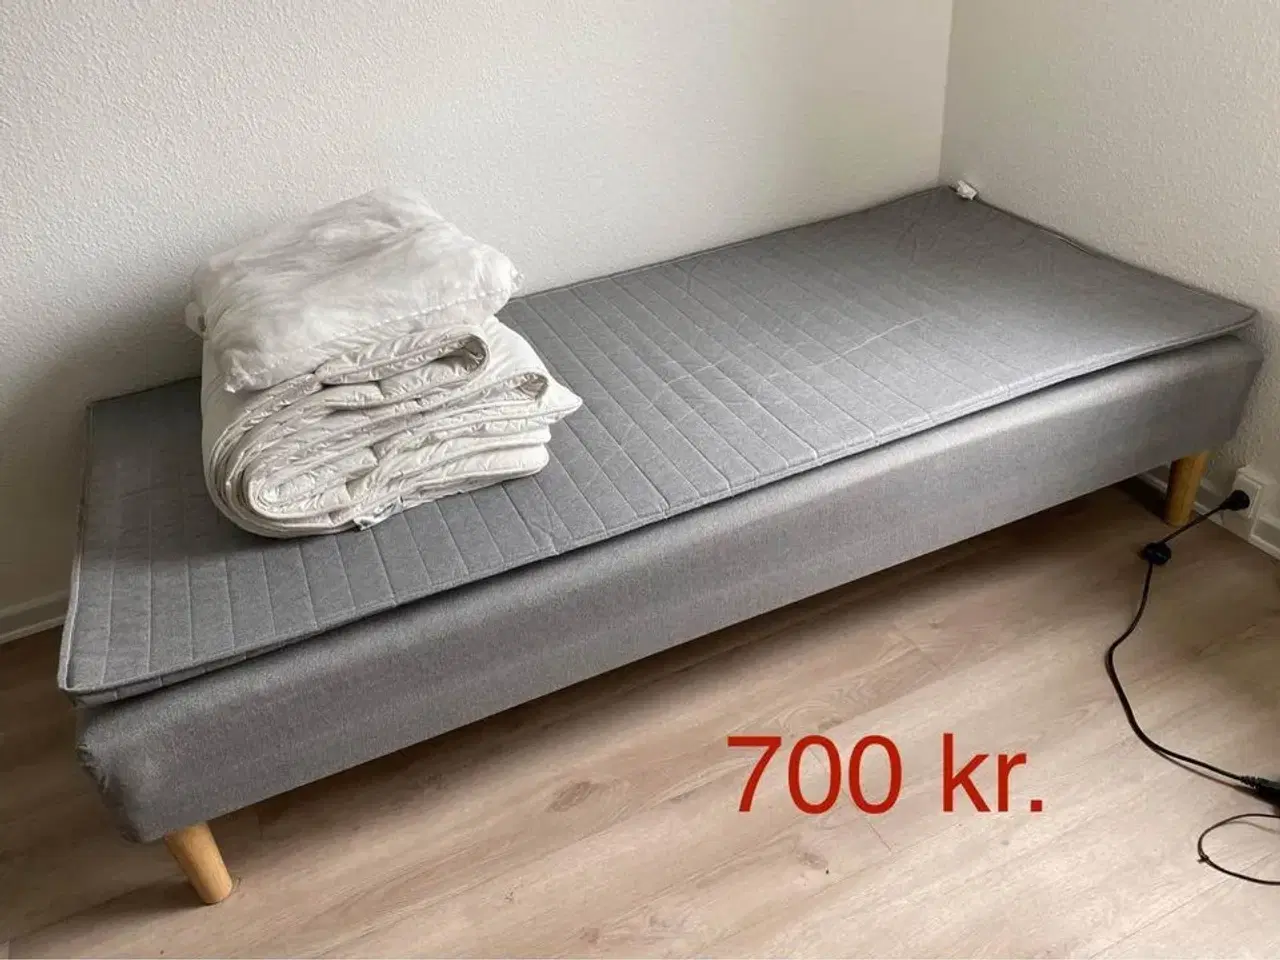 Billede 1 - IKEA bed with duvet and pillow